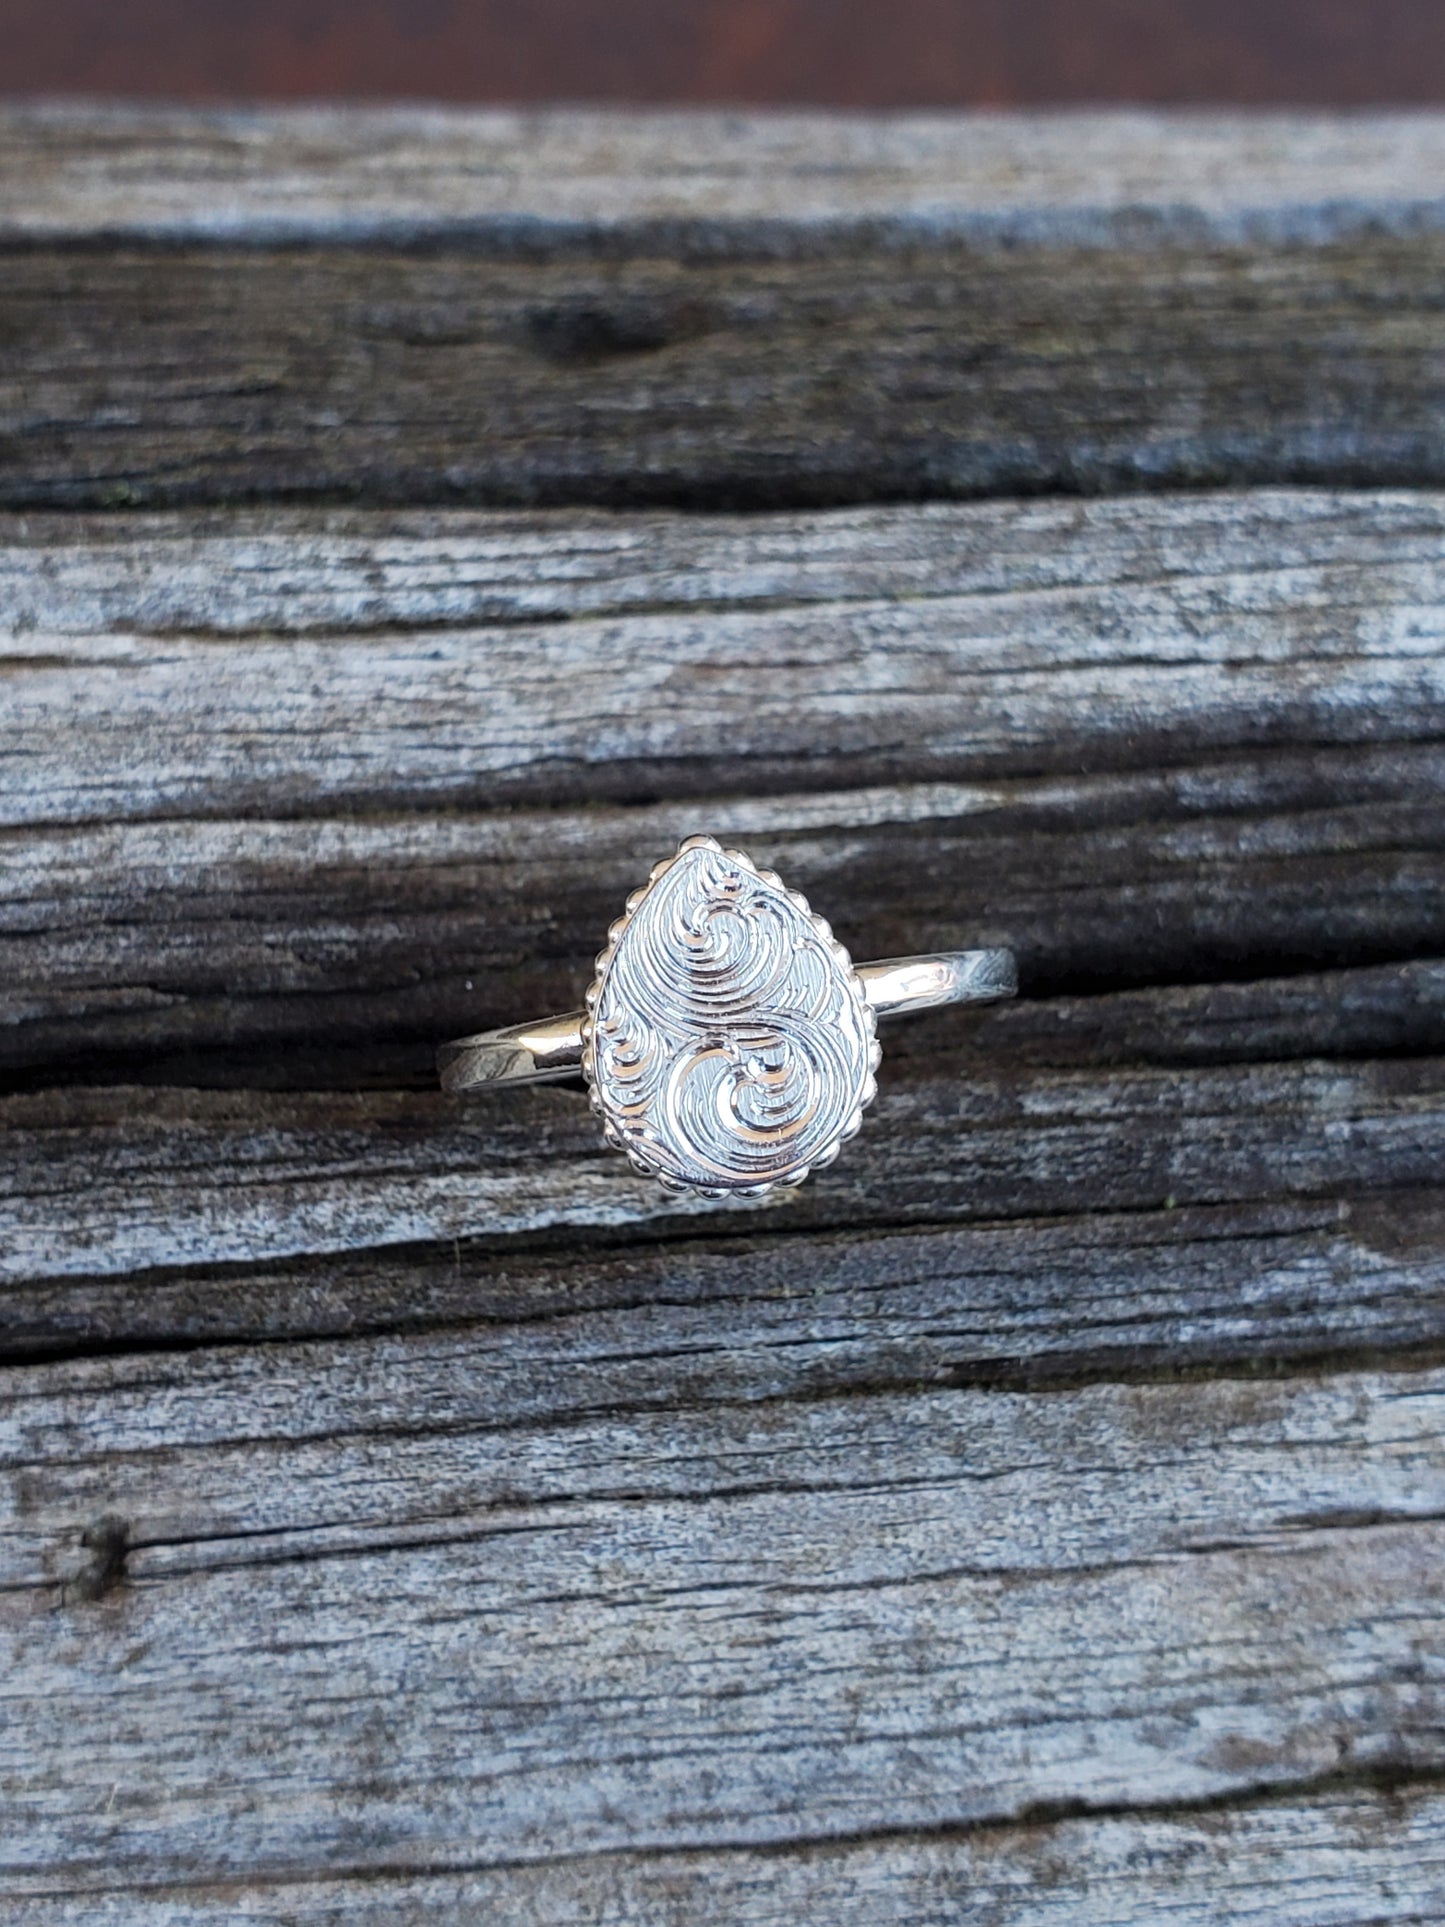 The Kiera: Silver cowgirl ring, Pear shape ring, hand-engraved ring, Western signet ring, unique silver ring, western fashion, bridesmaid gift